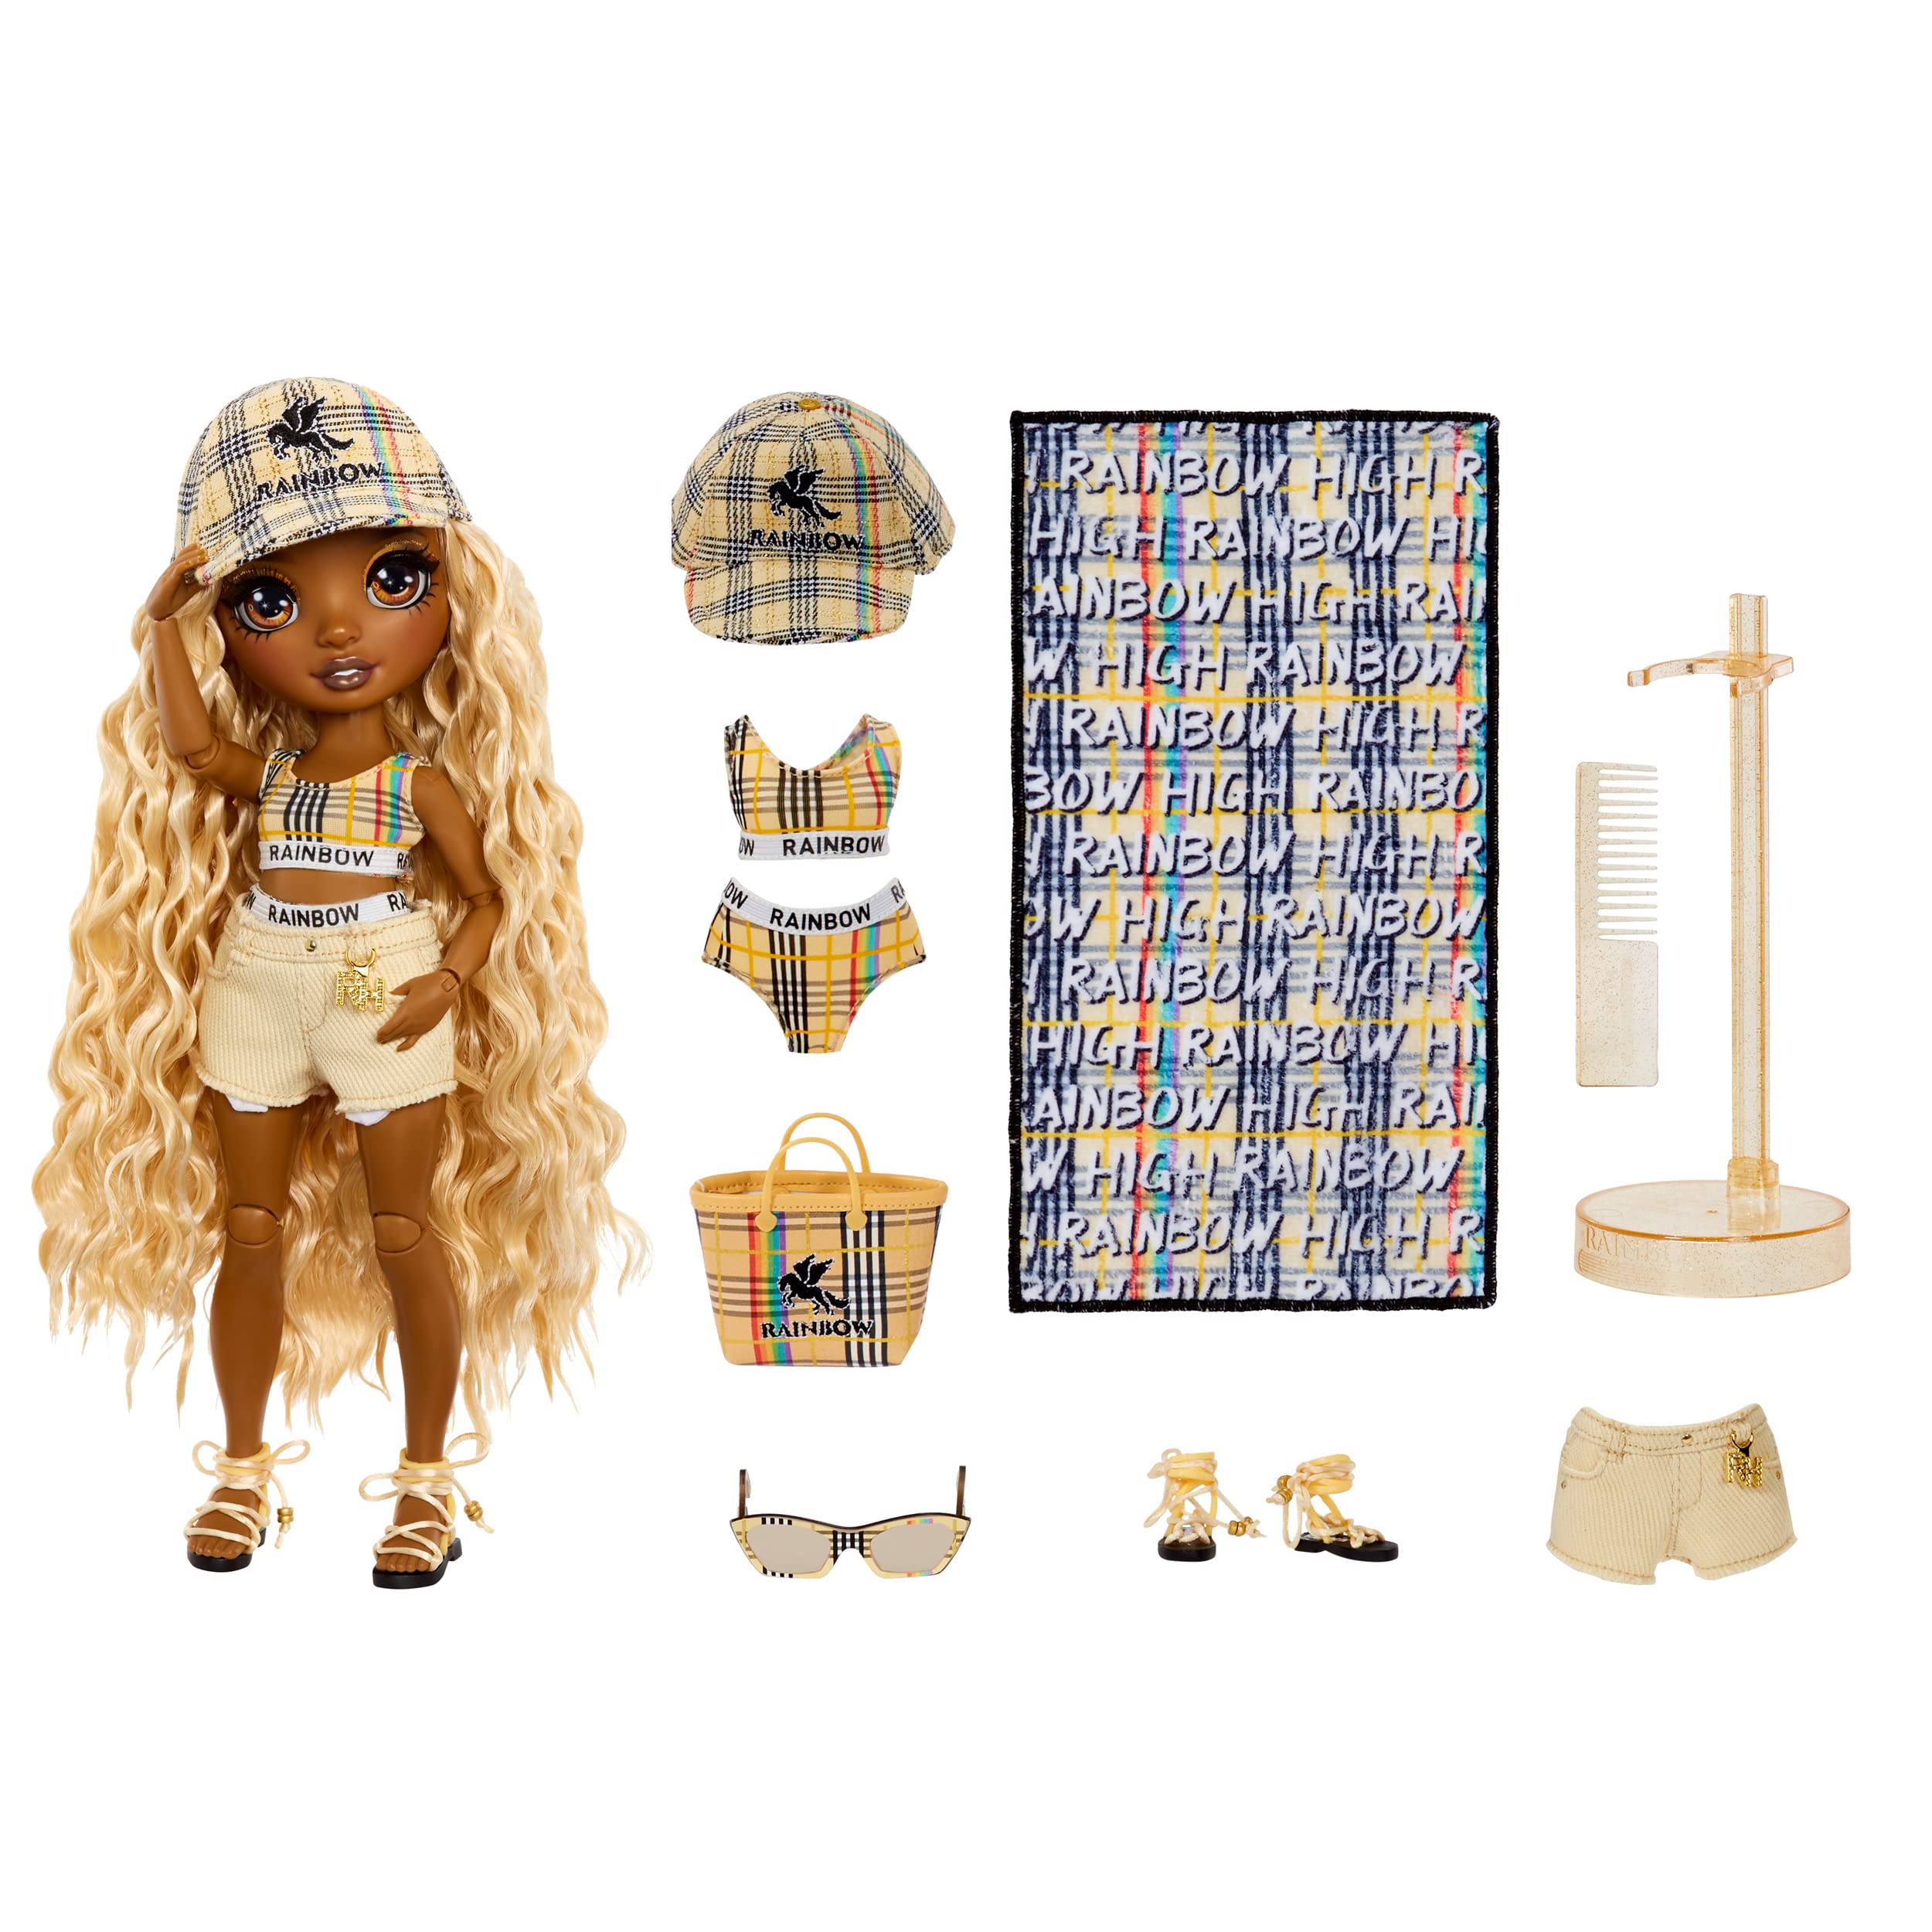 Rainbow High Pacific Coast Harper Dune- Sand (Light Yellow) Fashion Doll with 2 Designer Outfits, Pool Accessories Playset, Interchangeable Legs, Toys for Kids, Great Gift for Ages 6-12+ Years